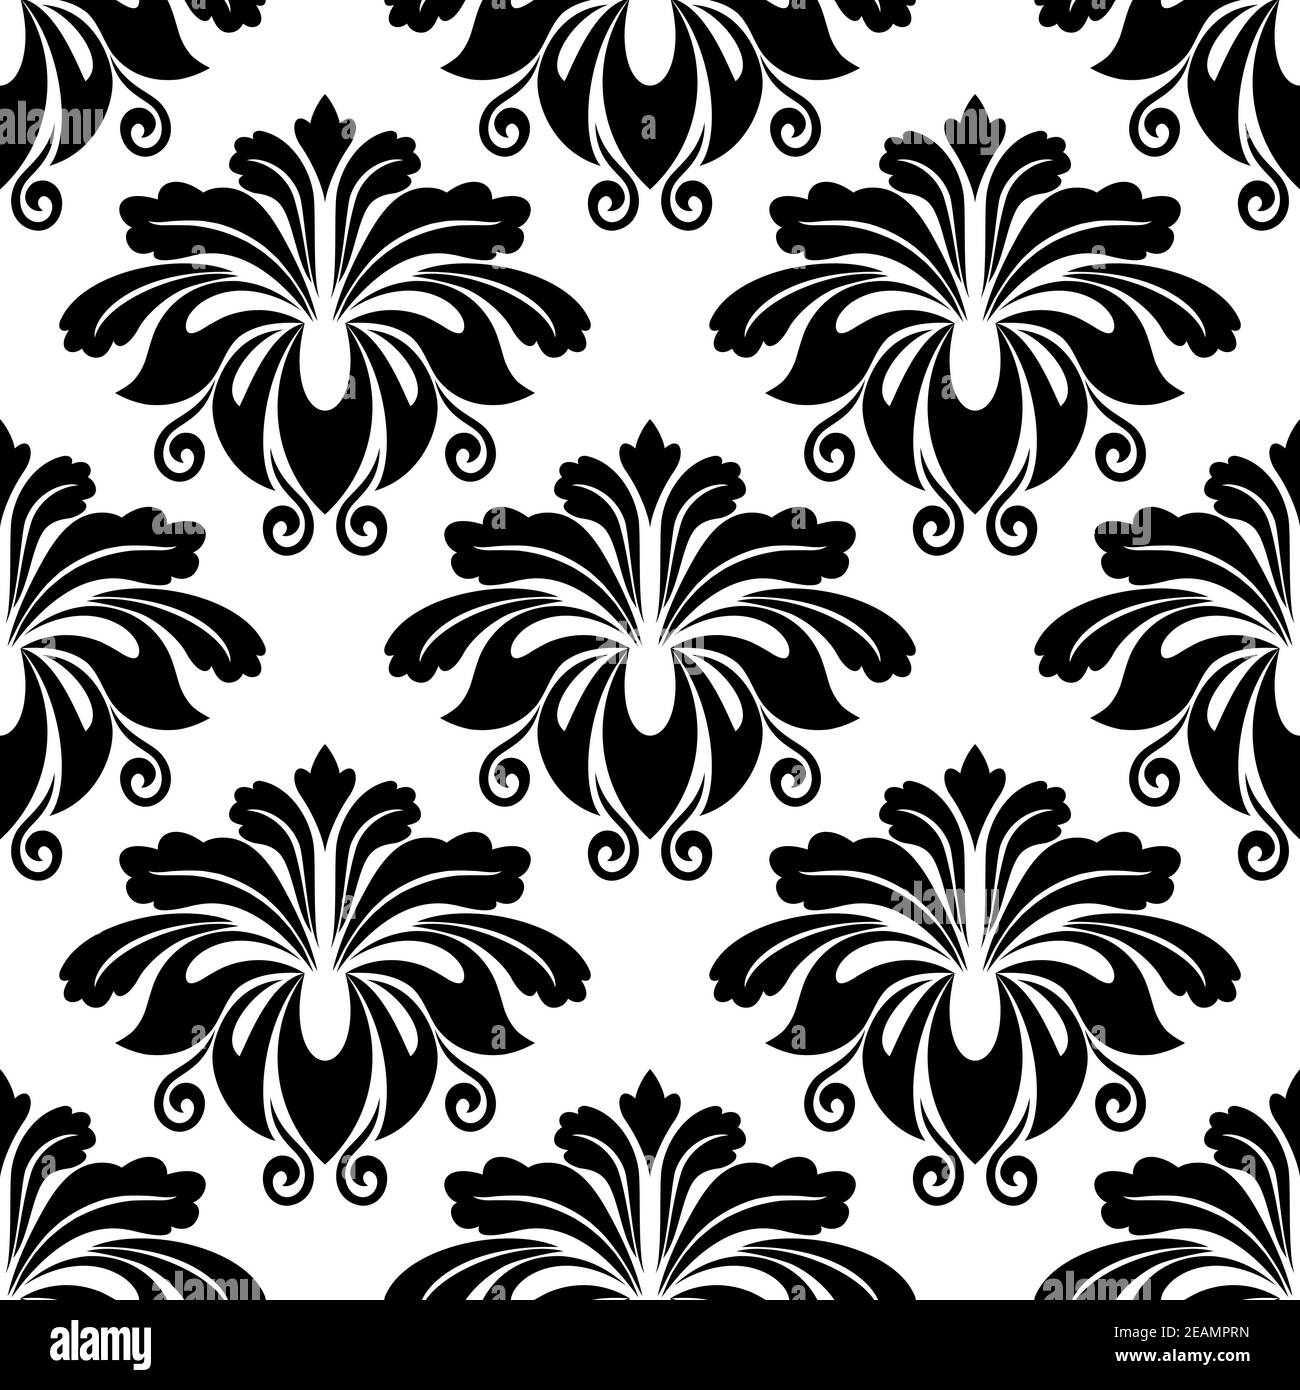 Black and white dainty floral seamless pattern background for wallpaper or fabric design in square format Stock Vector